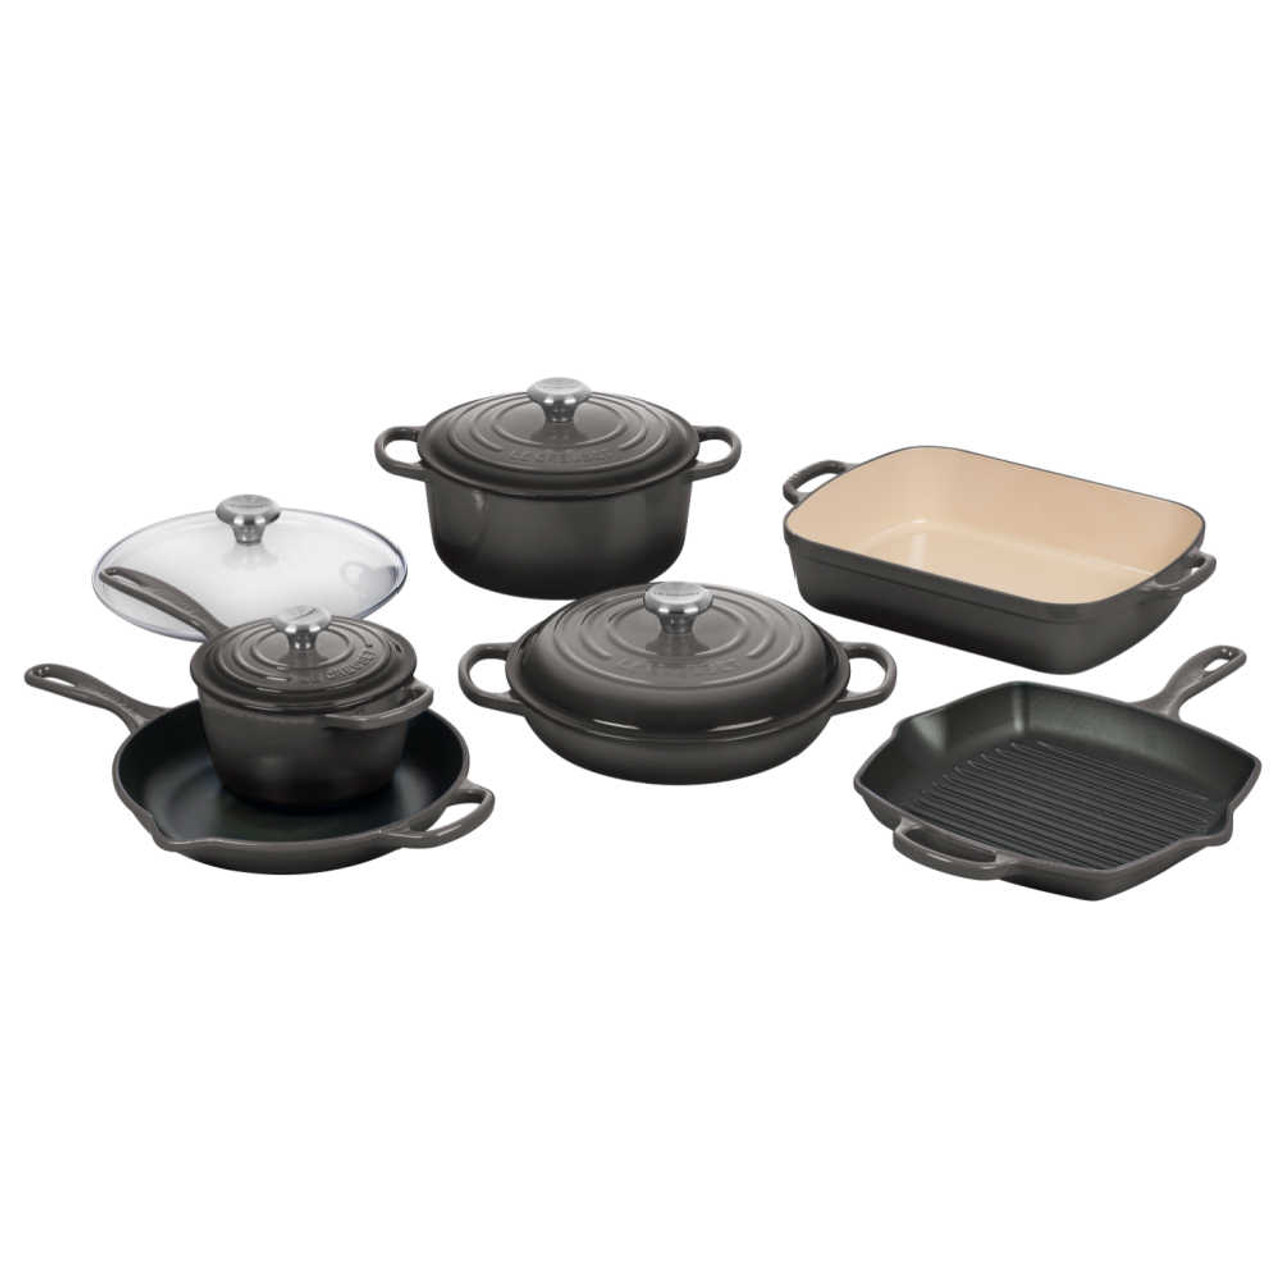 https://cdn11.bigcommerce.com/s-hccytny0od/images/stencil/1280x1280/products/4448/17458/Le_Creuset_10-Piece_Cast_Iron_Cookware_Set_in_Oyster__02342.1639077977.jpg?c=2?imbypass=on